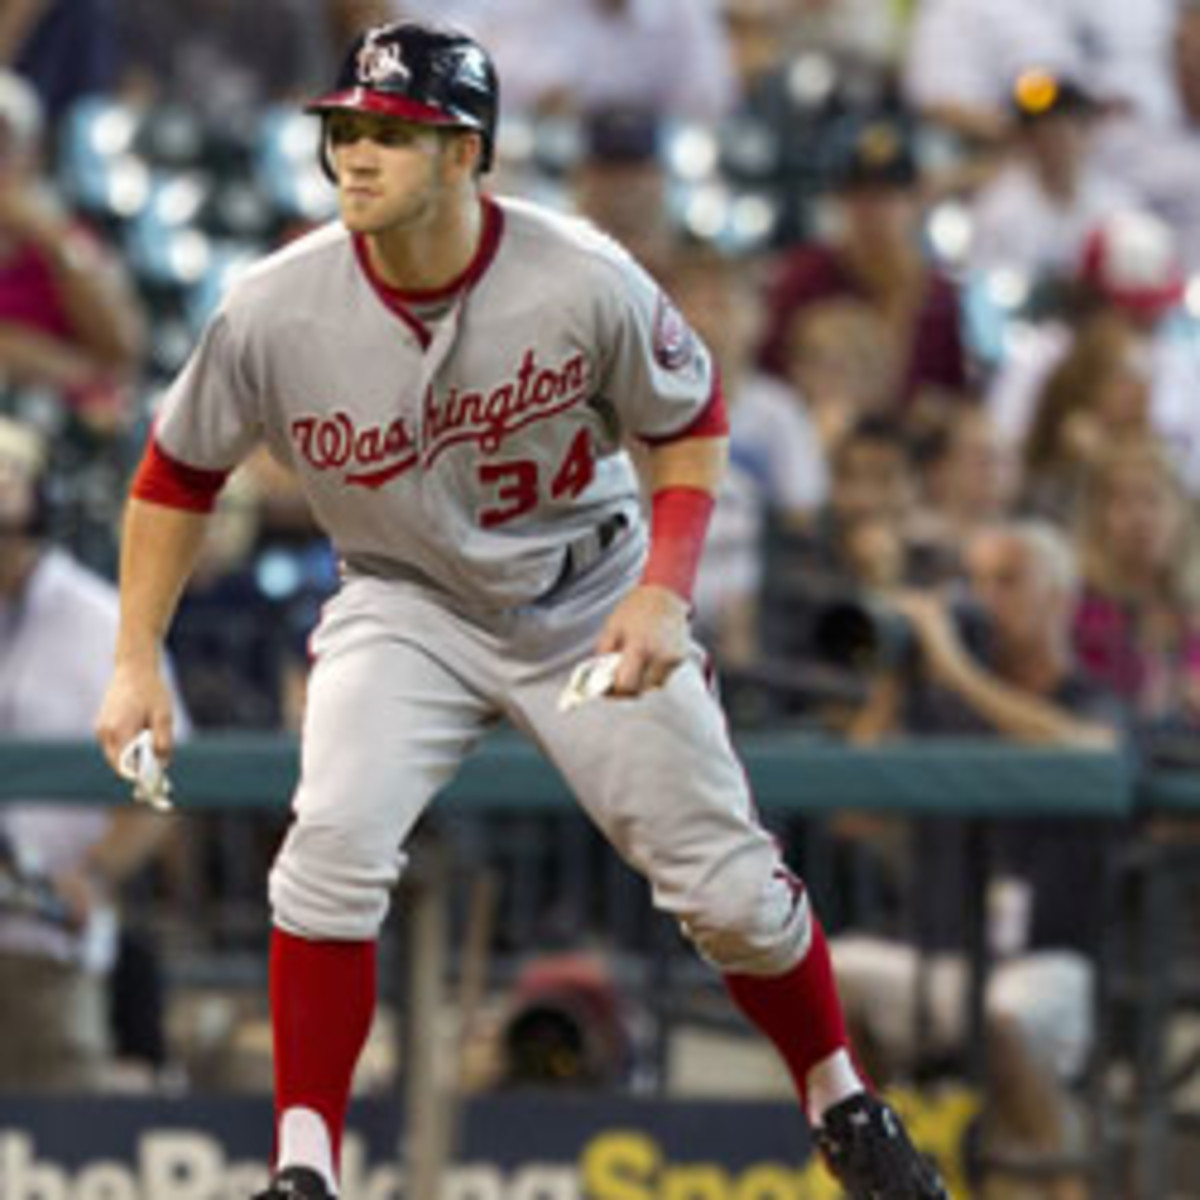 Nationals outfielder Bryce Harper left Wednesday's game with an apparent injury (Bob Levey/Getty Images)